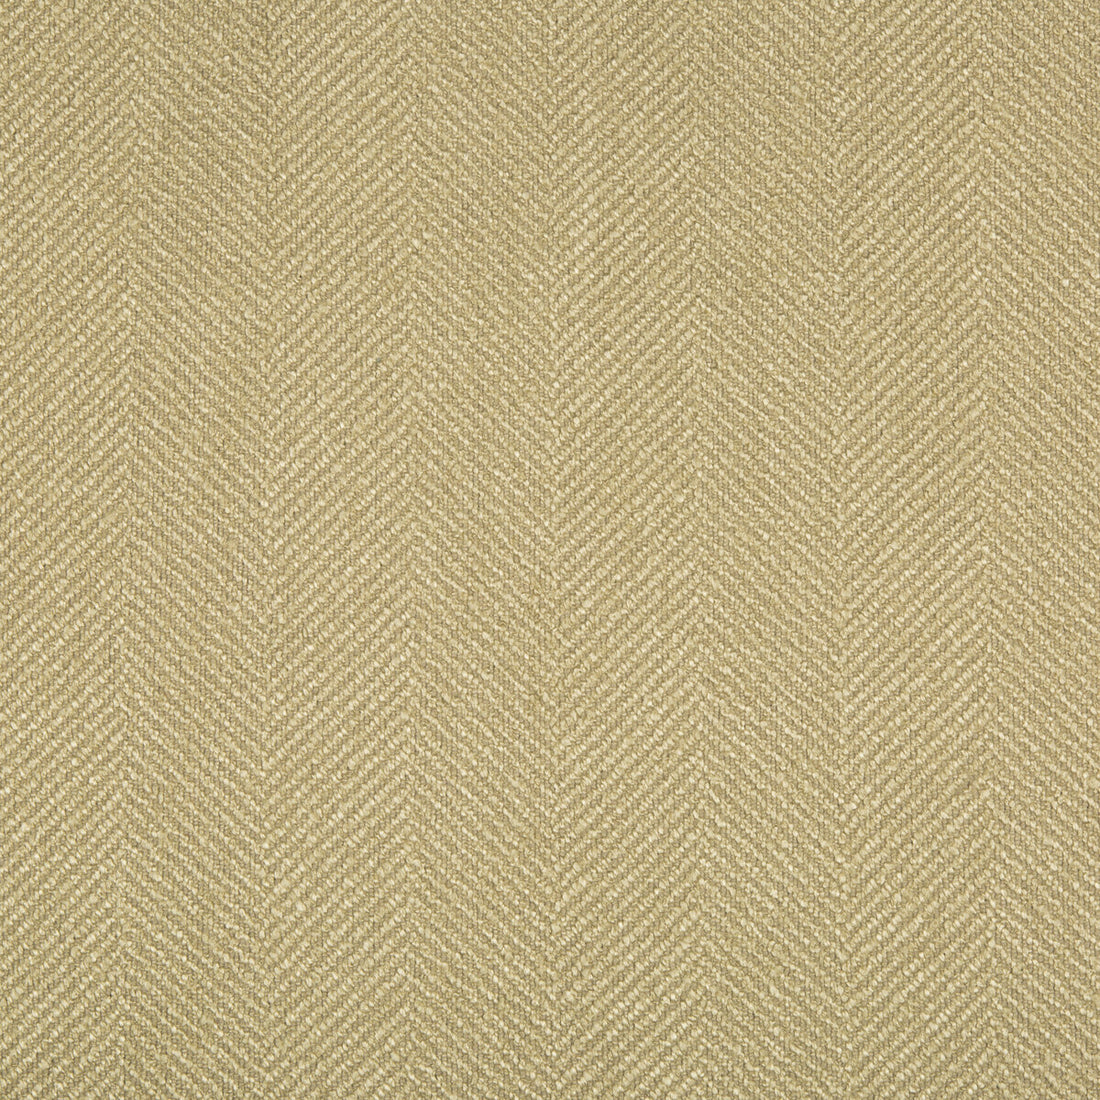 Kravet Contract fabric in 34637-16 color - pattern 34637.16.0 - by Kravet Contract in the Crypton Incase collection